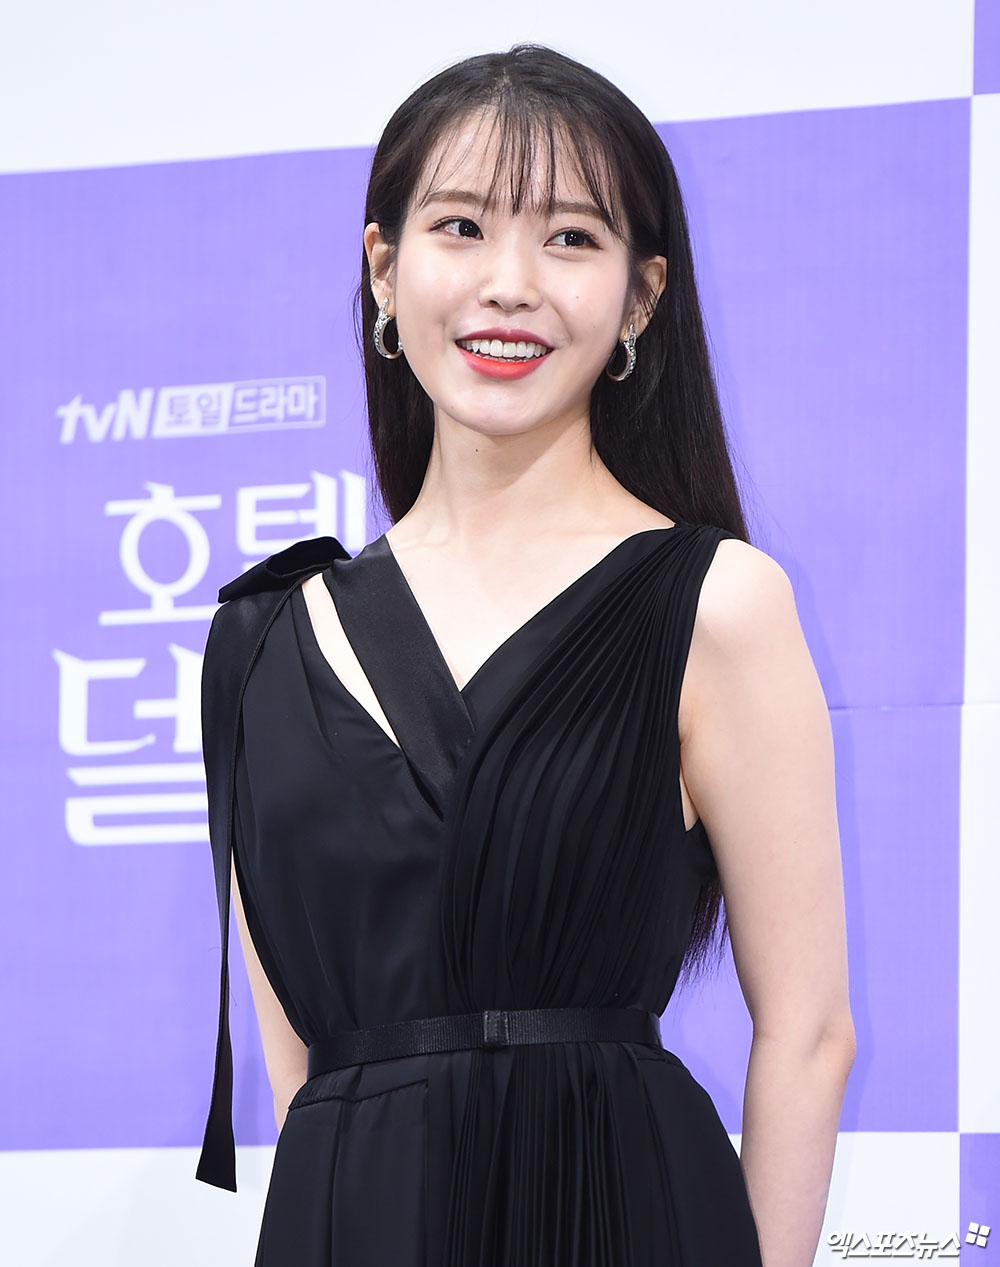 IU breathes with Park Seo-joon through Lee Byung-huns next film Dream.As a result of the three-day coverage, Lee Ji-eun (IU) confirmed her appearance in the film Dream (Gase), which is her first commercial film for IU, who has been an actor for a long time.Dream is a Greene delightful drama about the challenge of the homeless World Cup by Hongdae, a soccer player who is in the biggest crisis of his career, and special national players who have caught the ball for the first time in his life.IU will take on the heroine and breathe with Park Seo-joon.IU has been active in the Braun Pavilion mainly after appearing in Best Da Yi Shin, Producers, Lovers of the Moon: Bobo Sensei, My Uncle, and Hotel Deluna since the start of the Acting Activity with Drama Dream High in 2011.Last year, he made his debut as a movie star through Netflix Persona, an independent film.But there is no commercial film experience.With Singer and Drama also having great success, only commercial films remained; IU joined hands with director Lee Byung-hun, who became 10 million directors for the film extreme job, to meet Audiences.Meanwhile, Park Seo-joon, IU Main actors Dream is scheduled to crank in the first half of 2020.Photo = DB